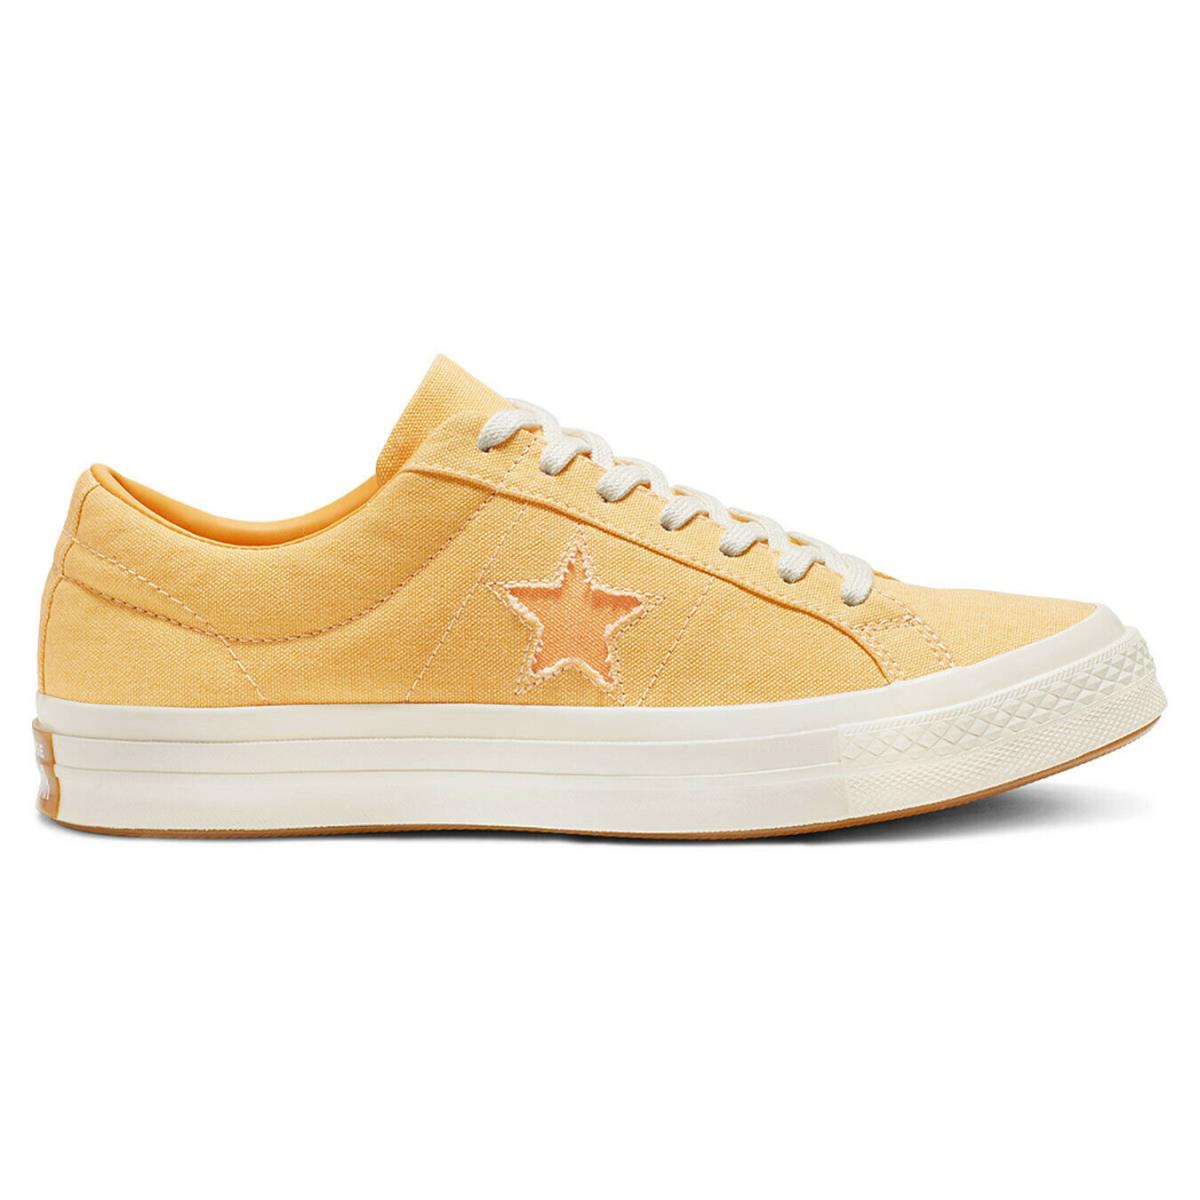 Men`s Converse One Star OX Athletic Fashion Sneakers 164358C - Yellow